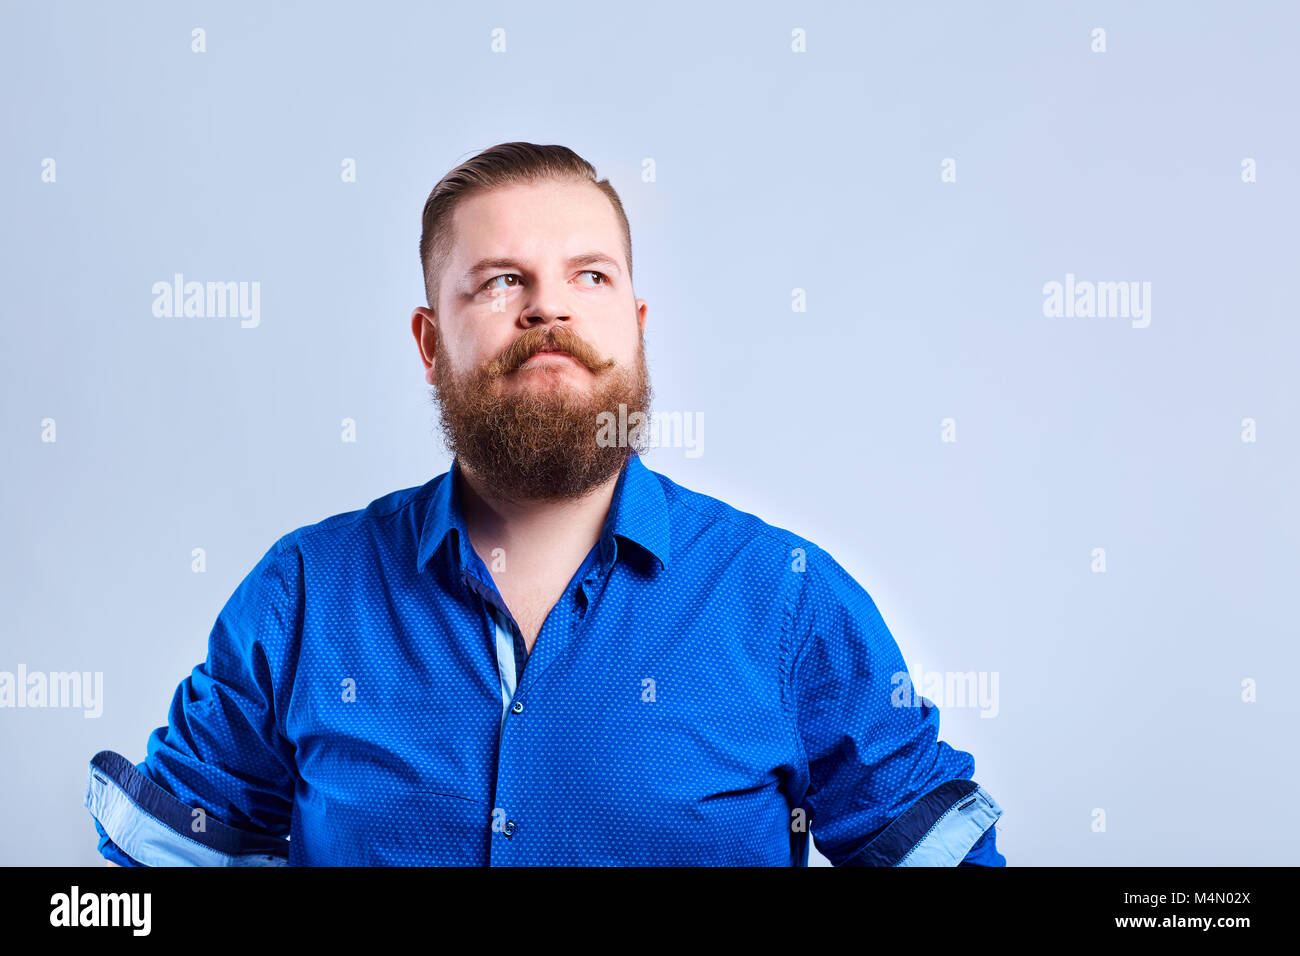 A fat, bearded man looks with a serious expression of emotion. Stock Photo